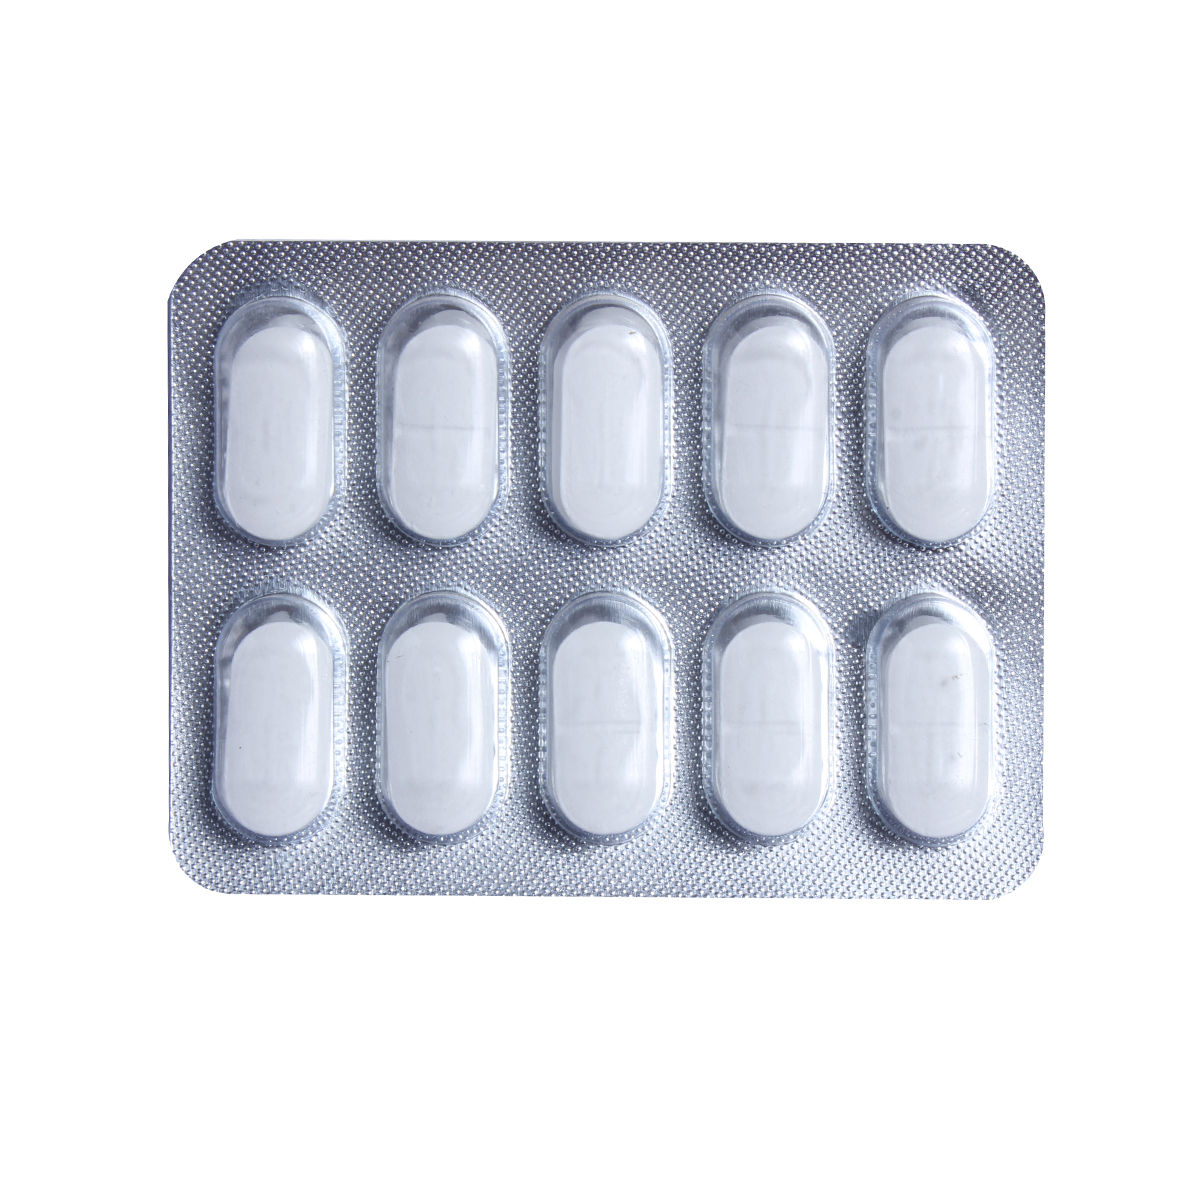 Craftocal Tablet 10's, Pack of 10 S